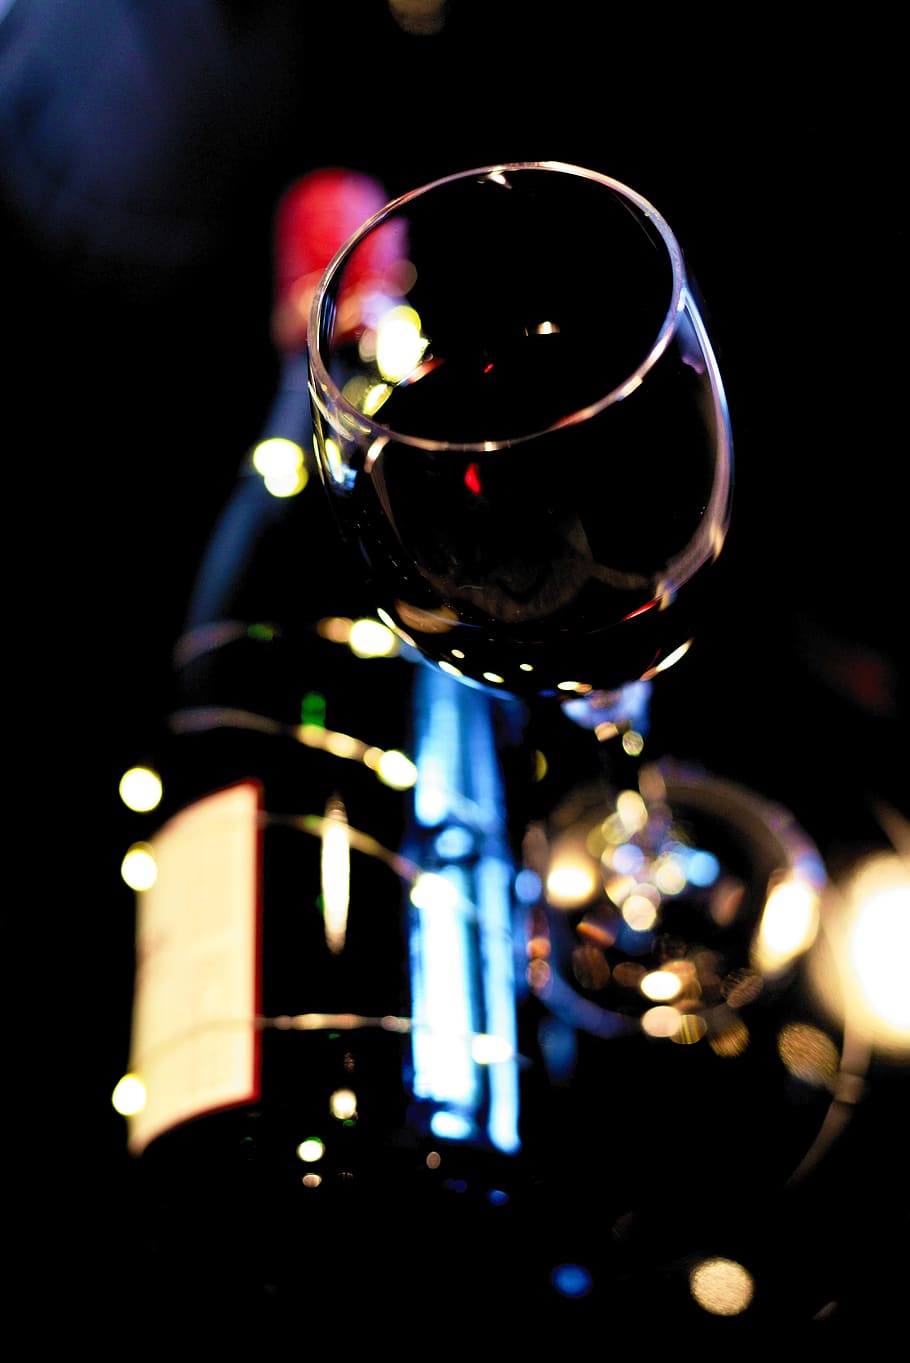 wine glass, red wine, wine, glass, alcohol, beverages, celebration, wine bottle, benefit from, lighting